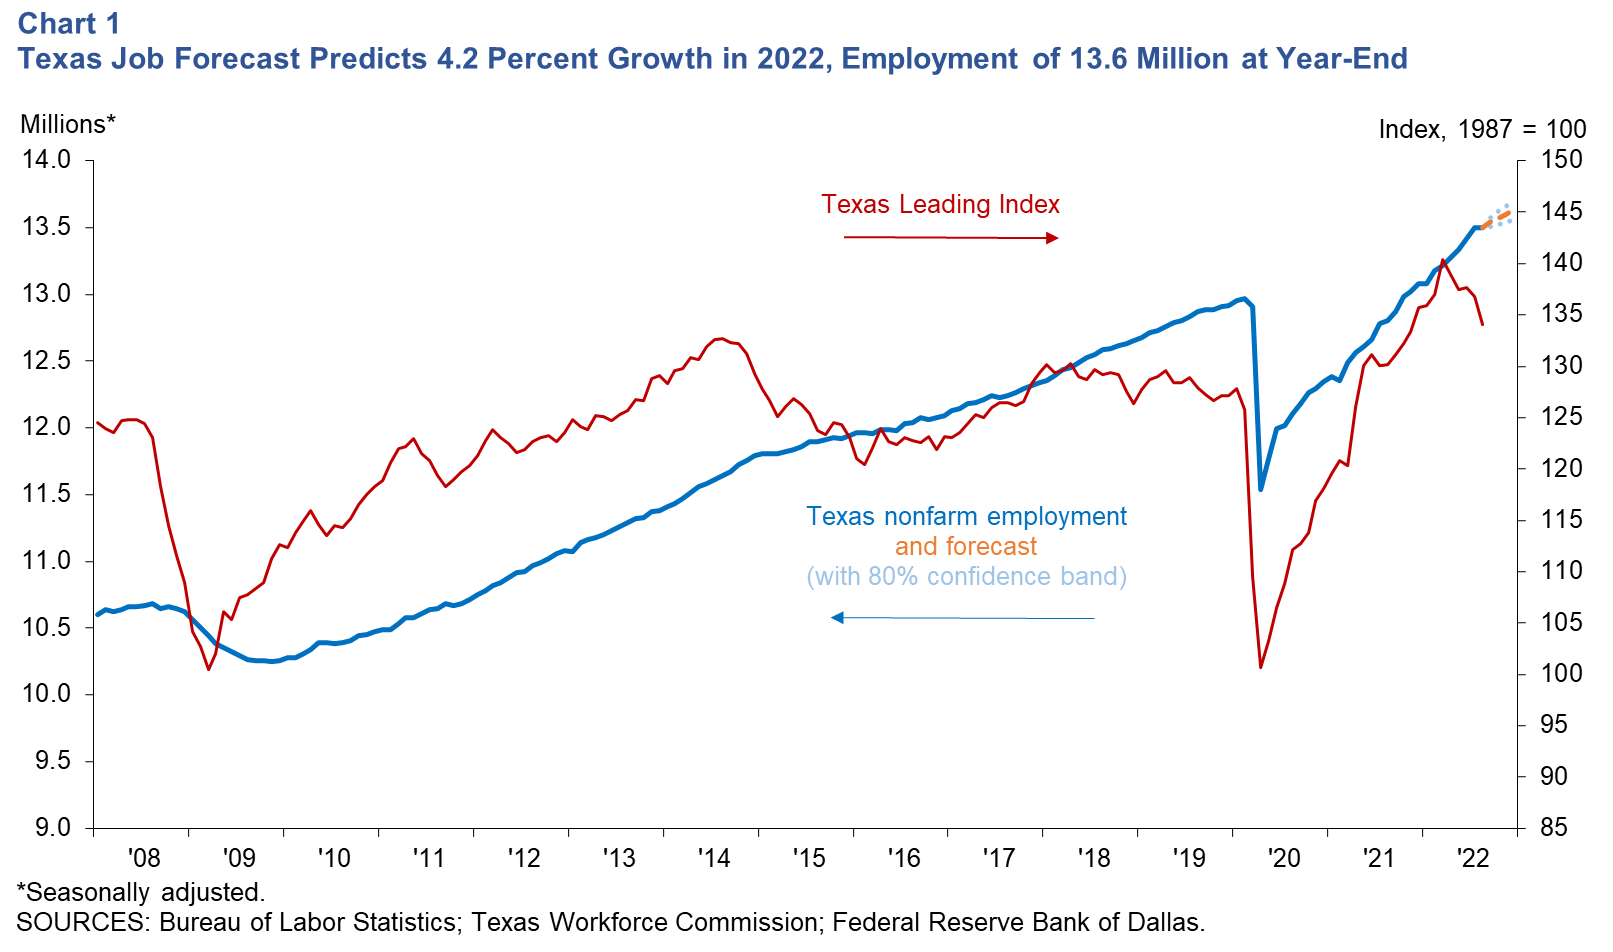 Texas Job Forecast Predicts 4.2 Percent Growth in 2022, Employment to End the Year at 13.6 Million